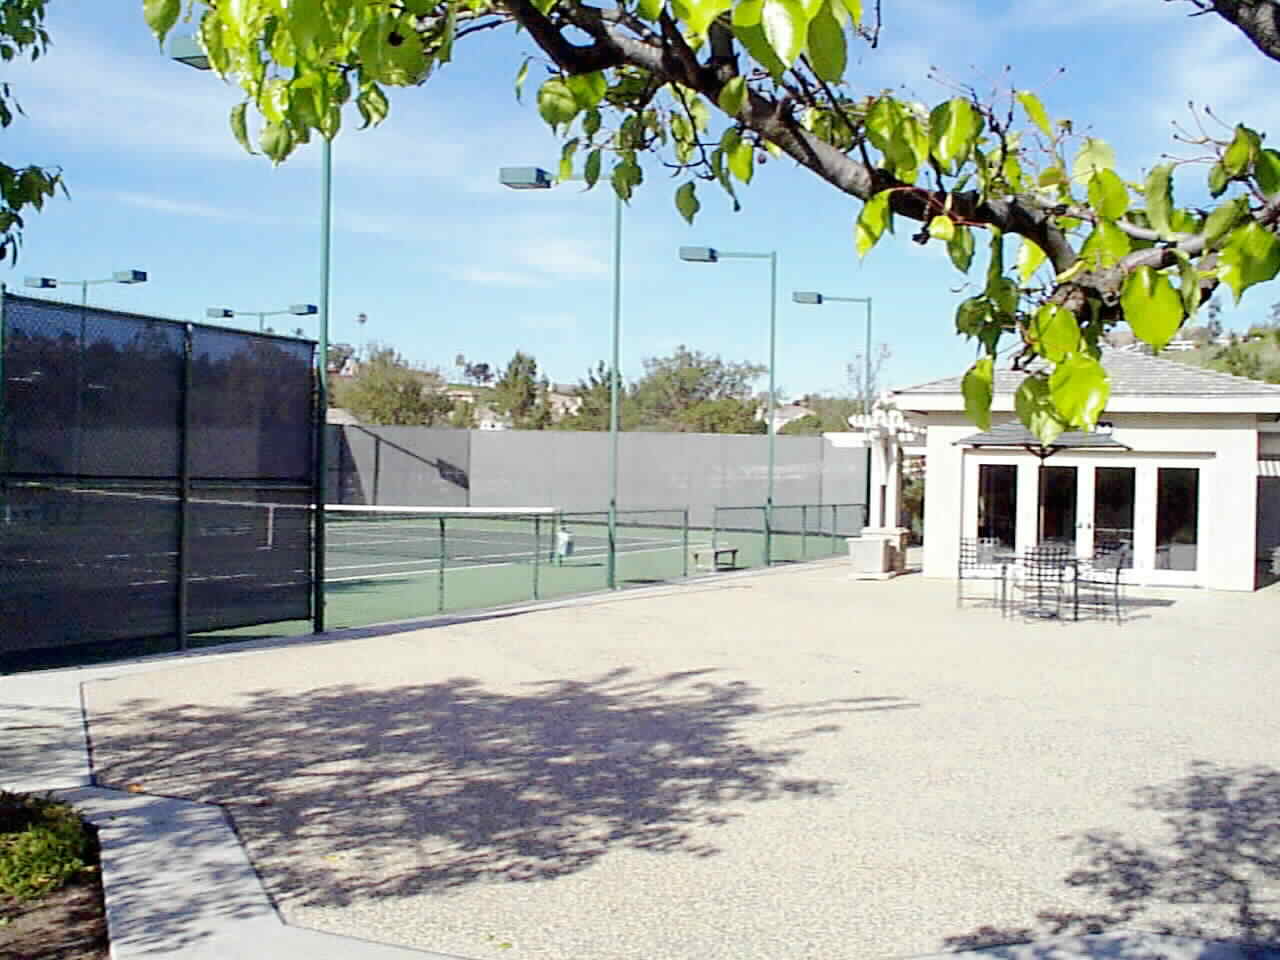 Perfectly Maintained Community Tennis Center